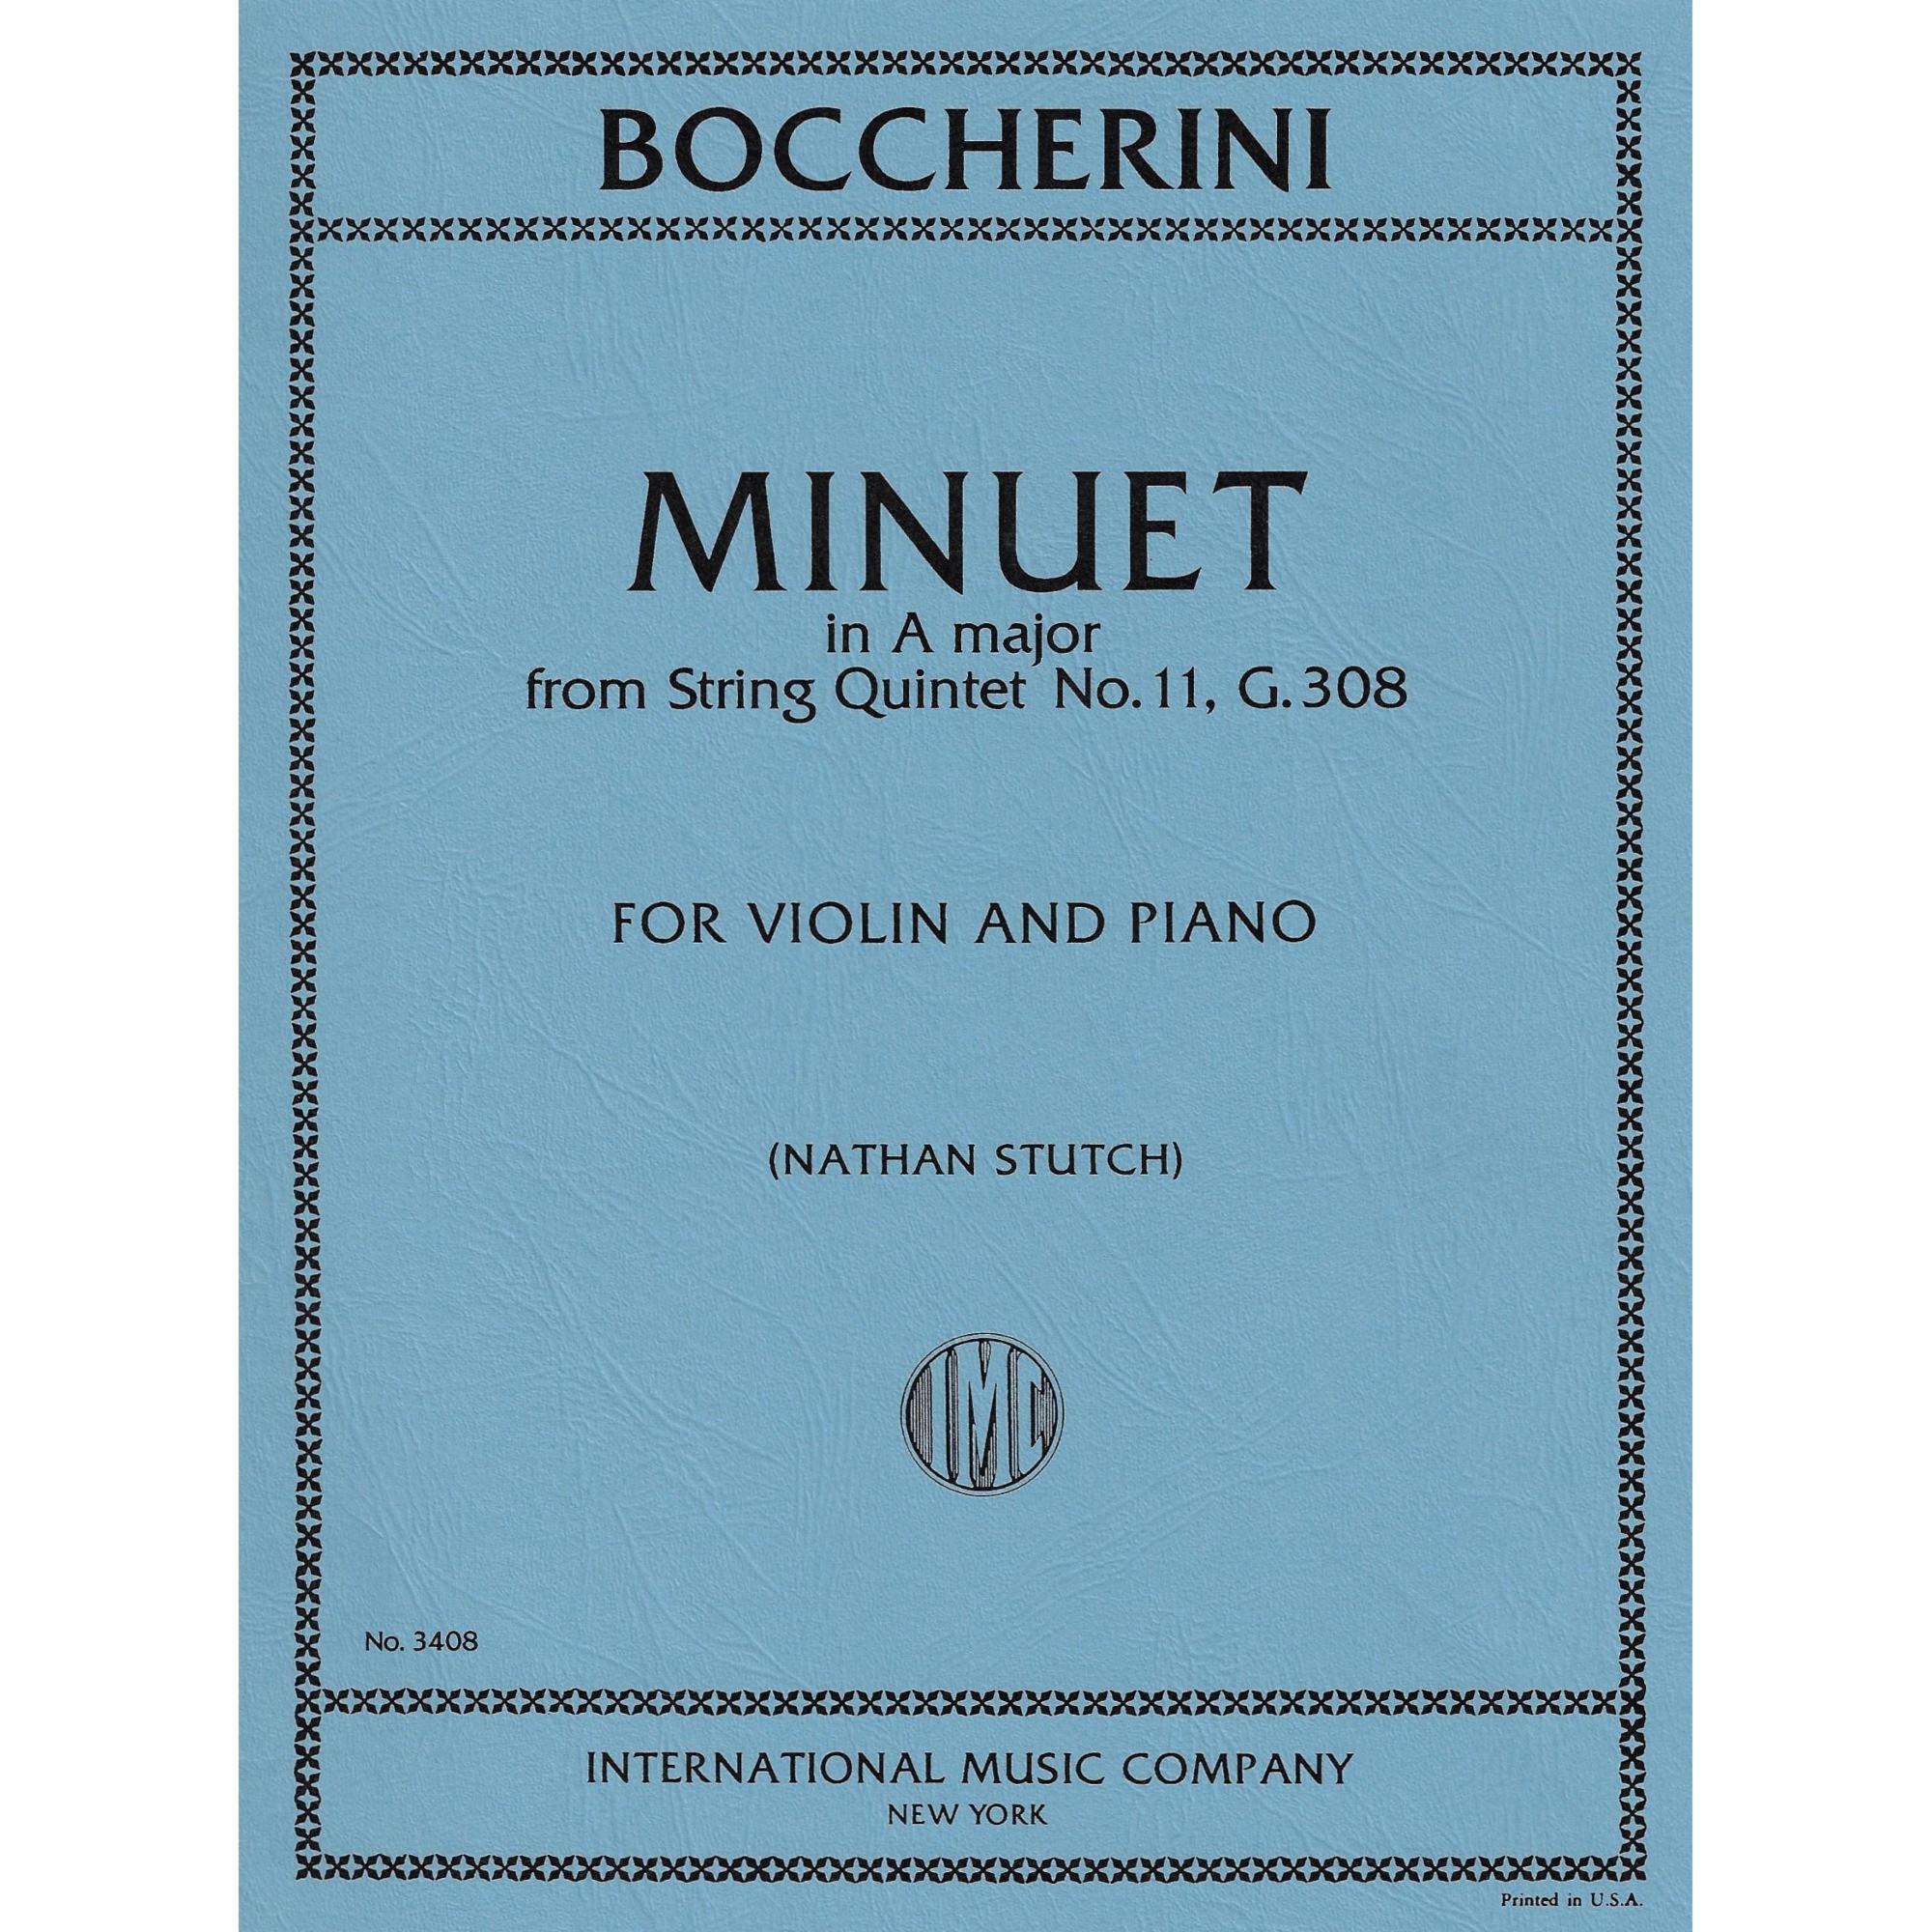 Boccherini -- Minuet in A Major, from String Quintet No. 11, G. 308 for Violin and Piano